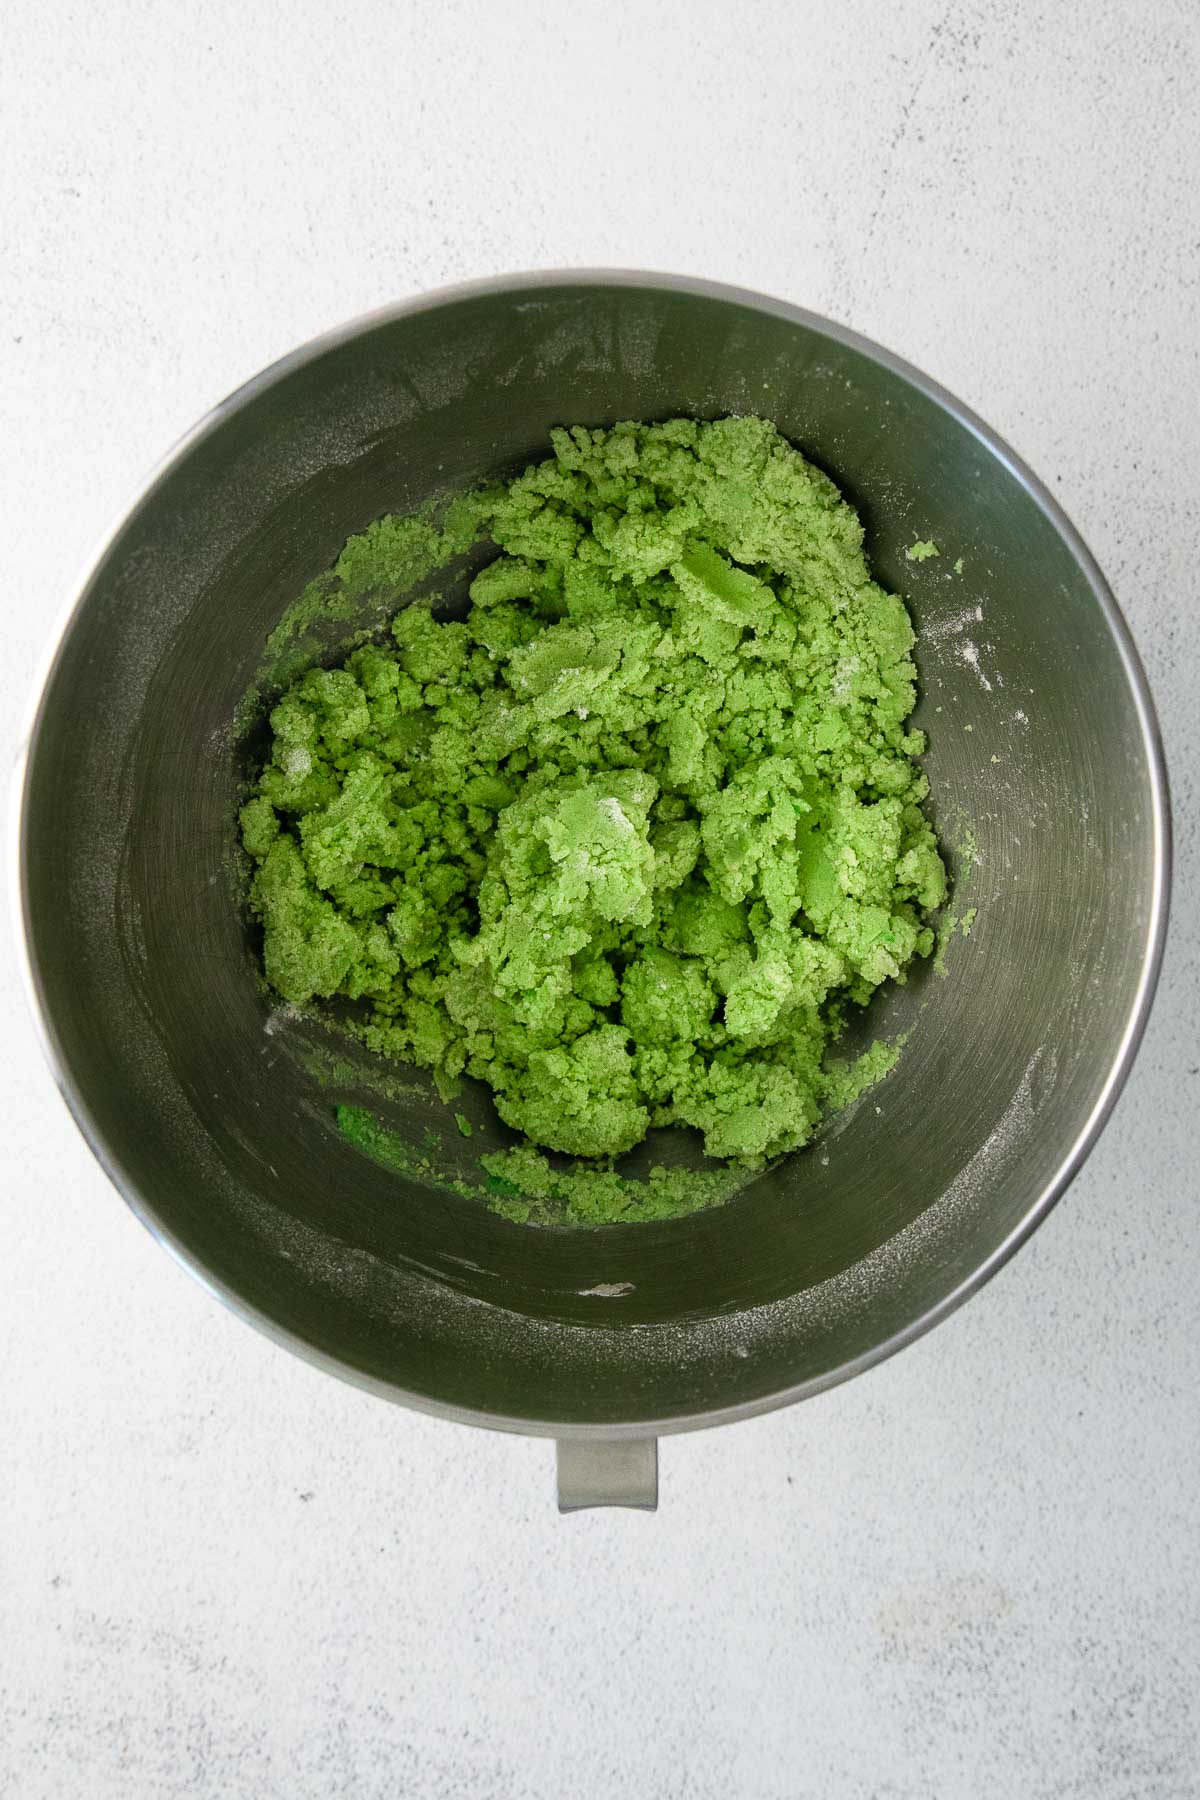 green cookie dough in a stainless steel mixing bowl